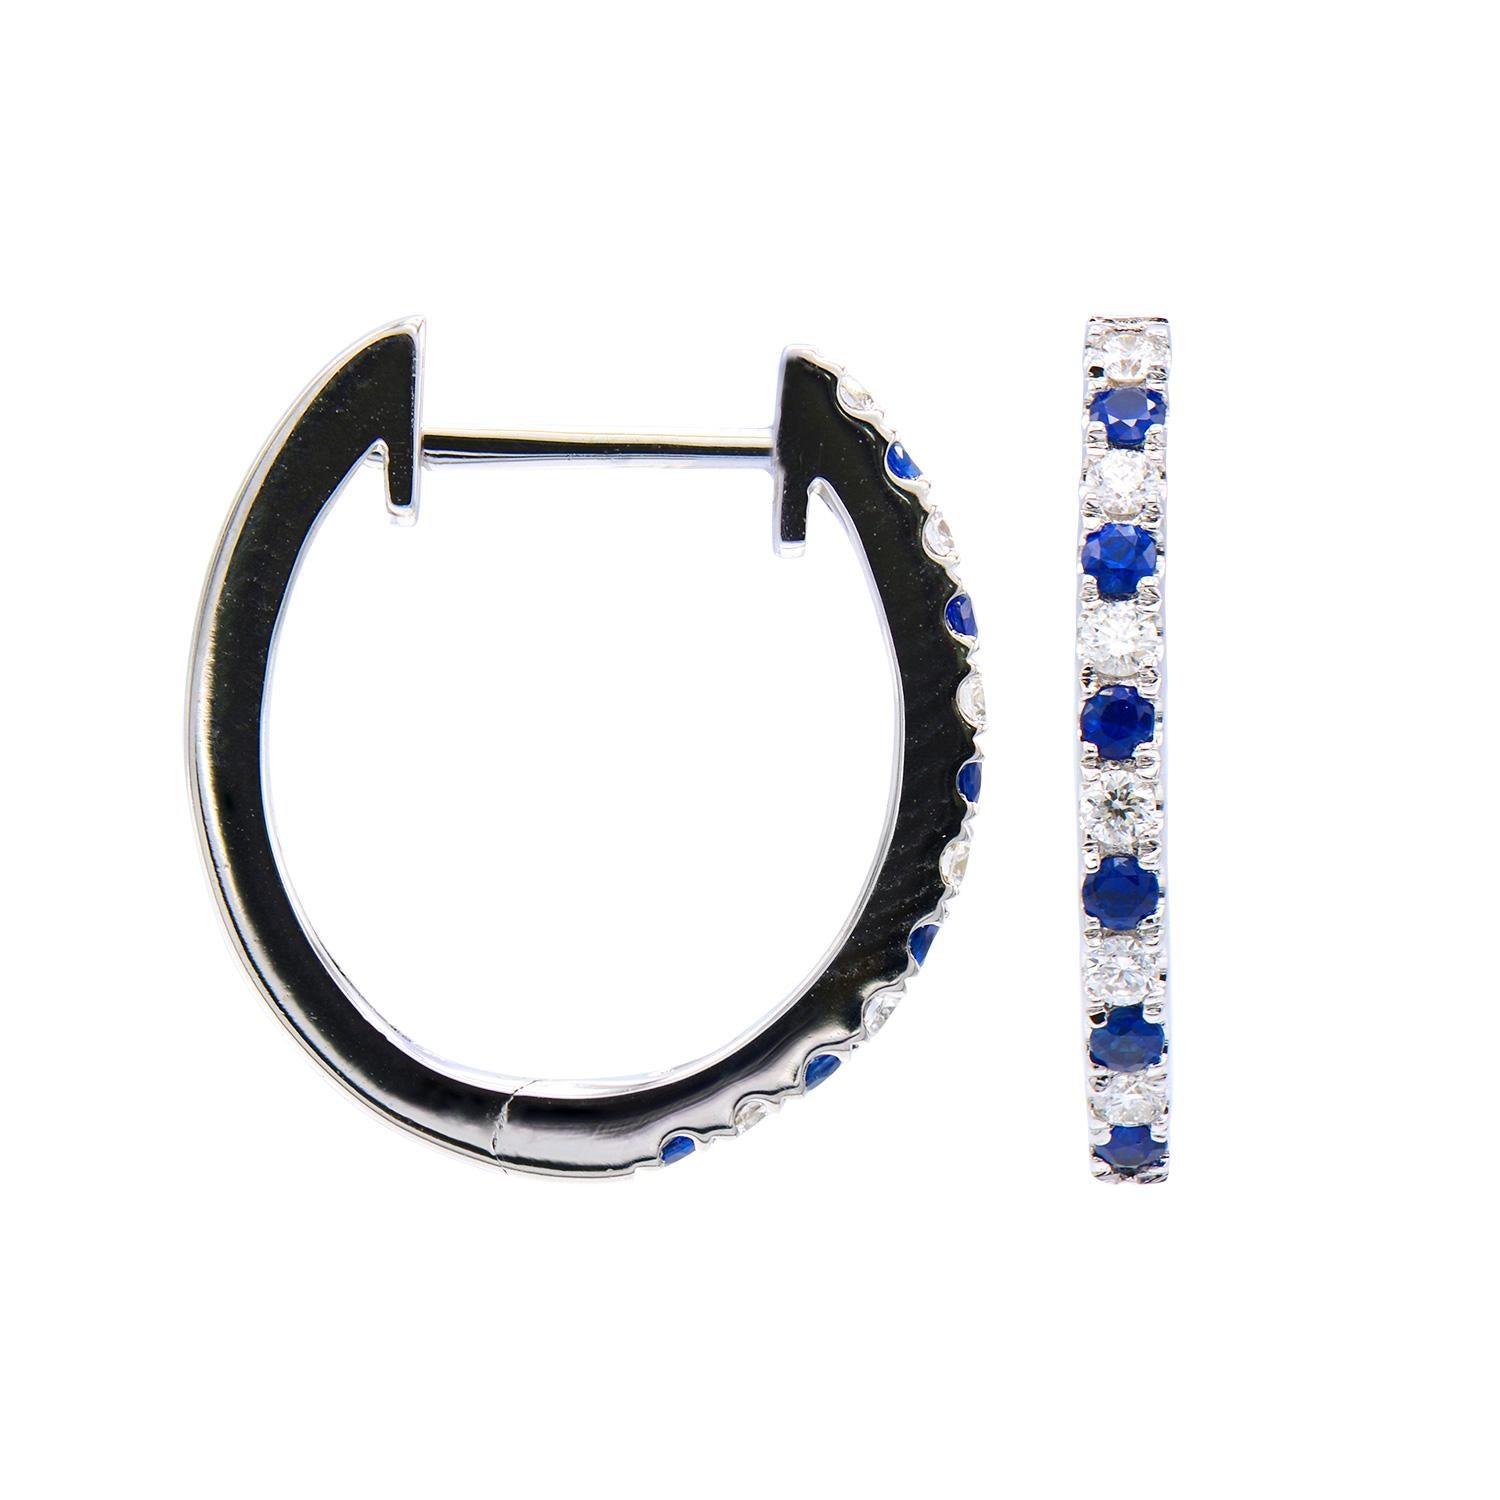 These hoops are elegant and beautiful. They are made from 2.4 grams of 14 karat white gold with a row of 24 round alternating diamonds on the front side. 12 diamonds are SI, H color and total 0.13 carats; the 12 sapphires total 0.16 carats. The